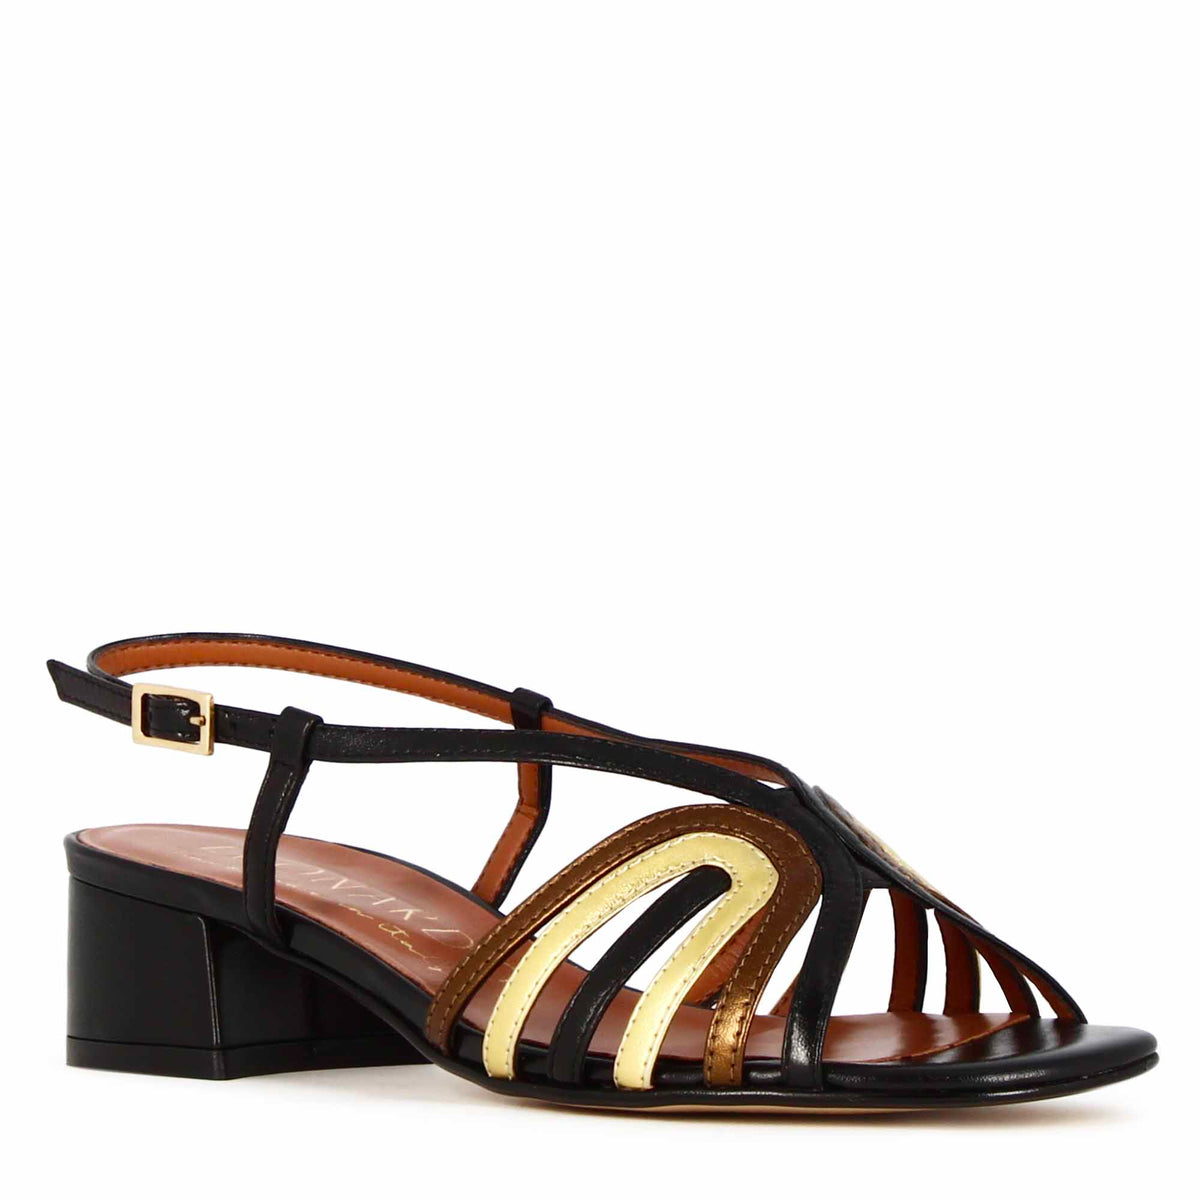 Women's sandal with multicolor laminated leather bands